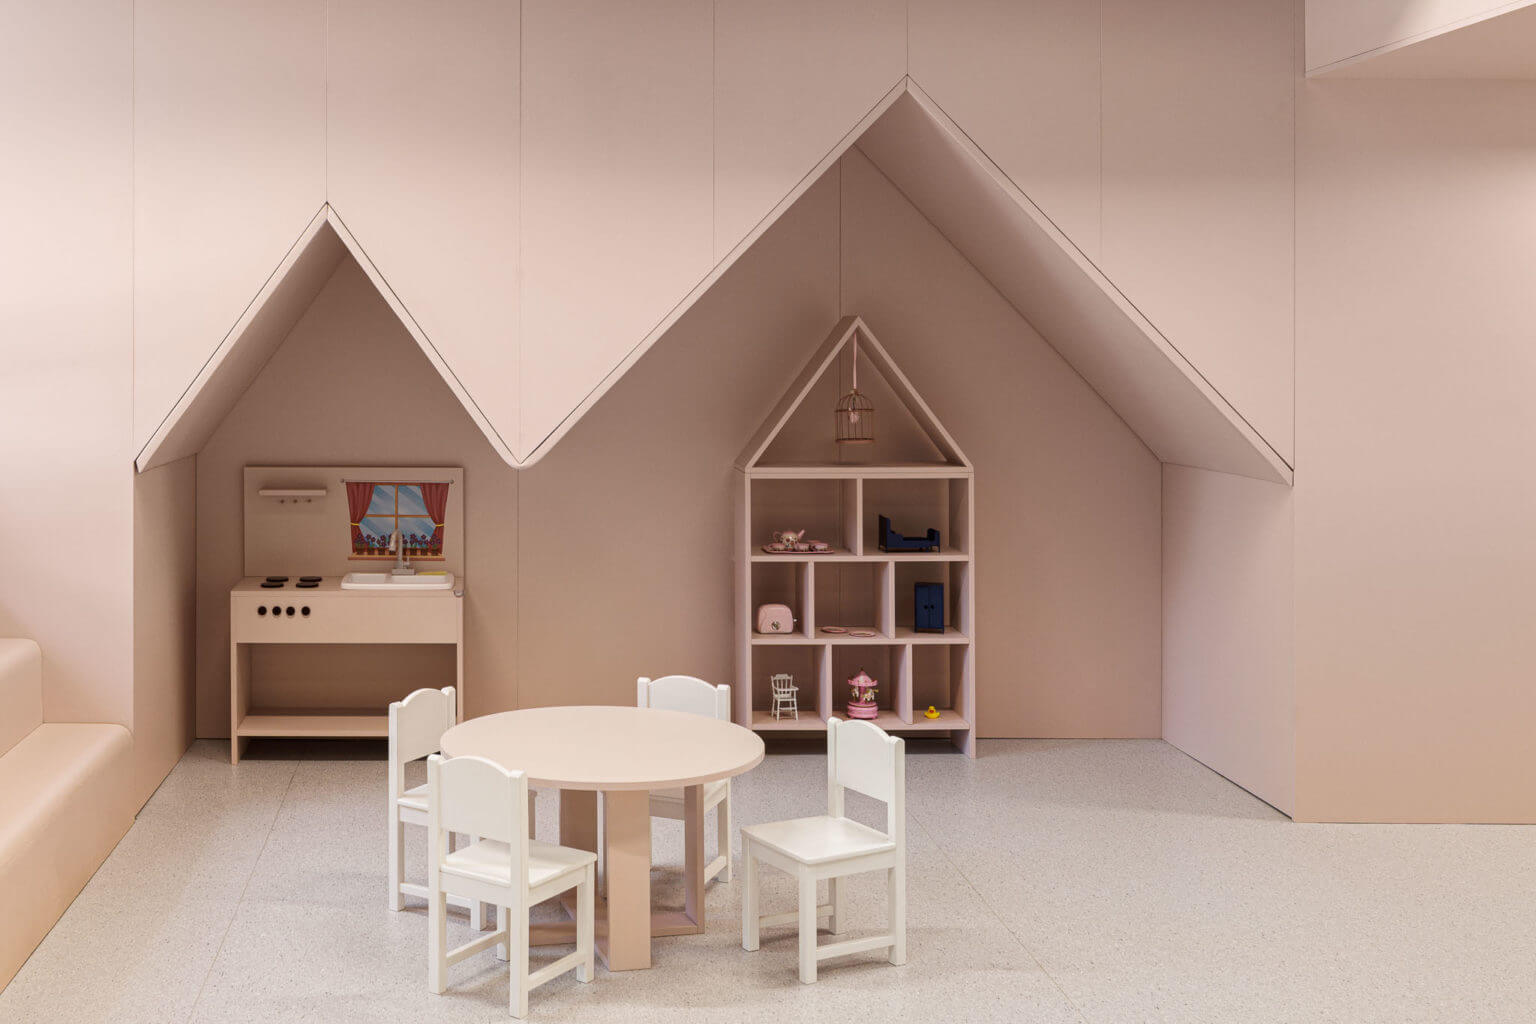 beige pink walls with gable shape